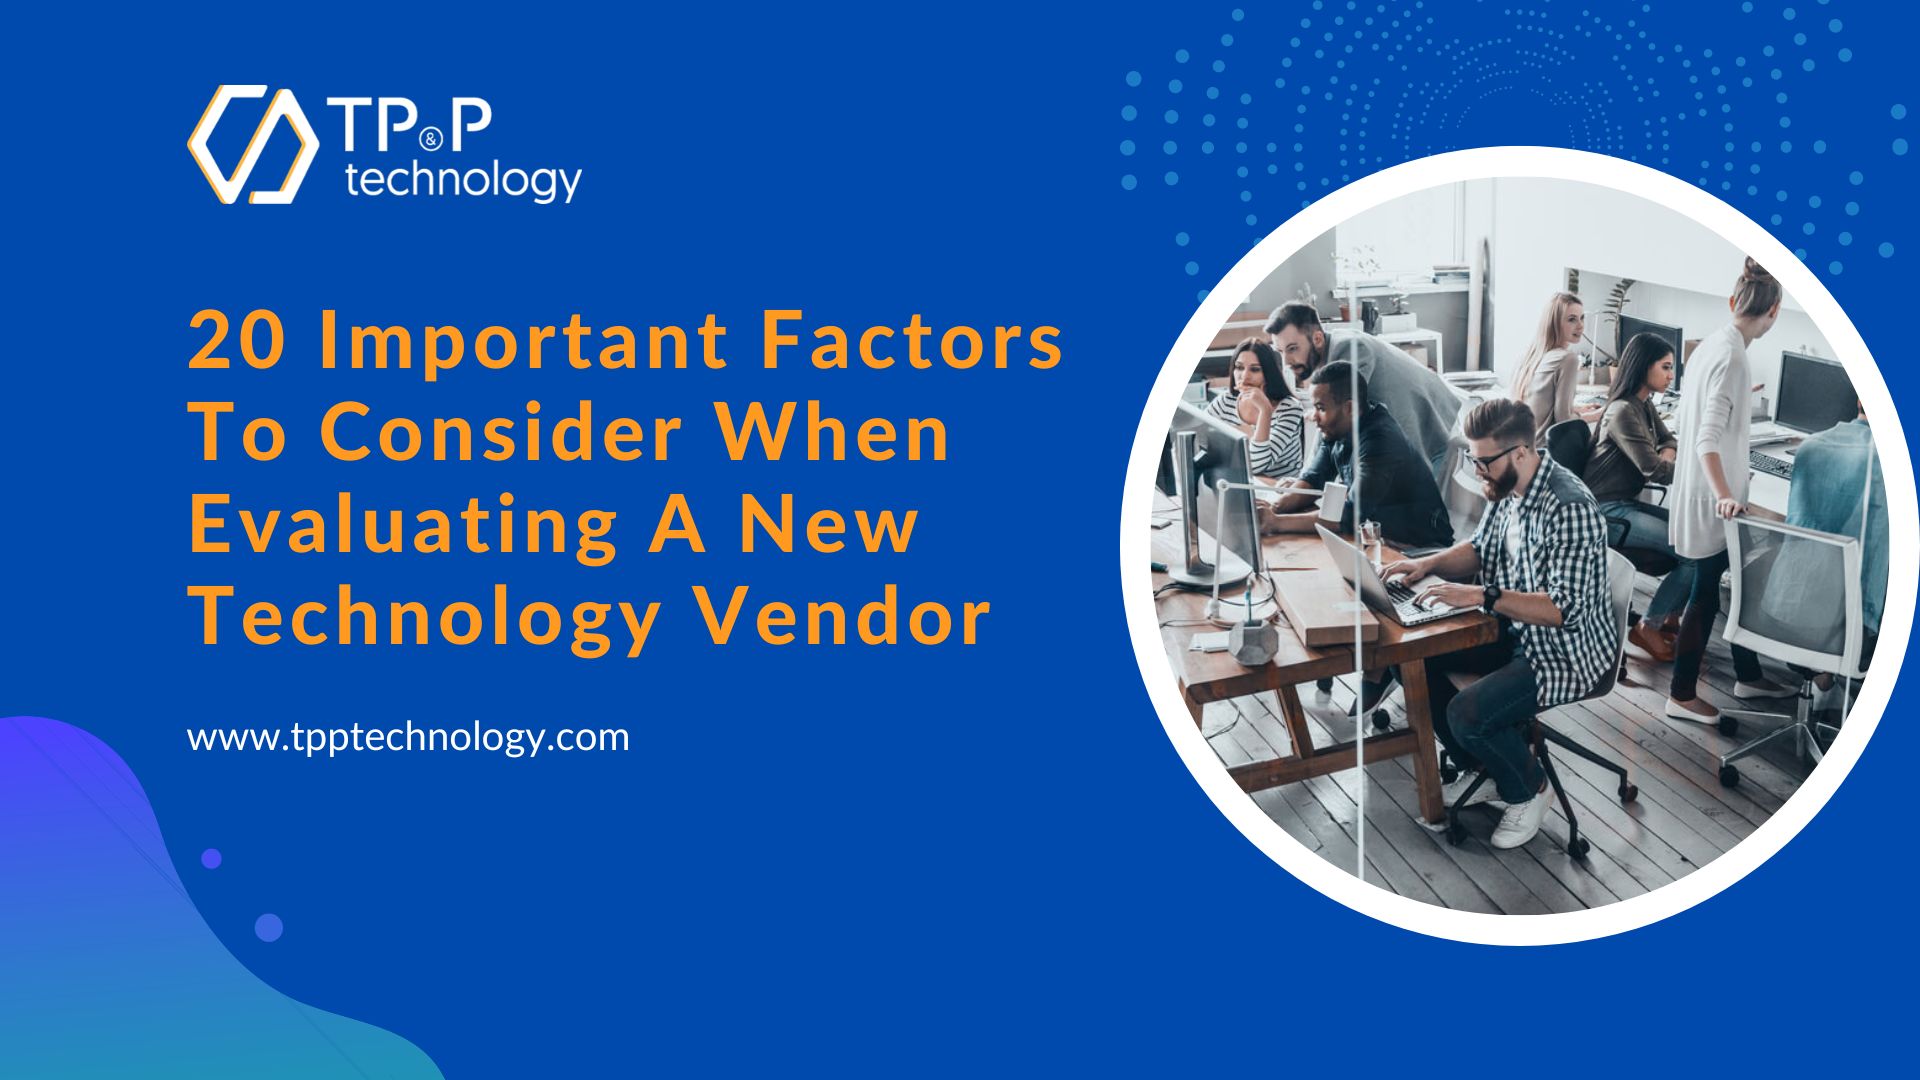 20 Important Factors To Consider When Evaluating A New Technology Vendor